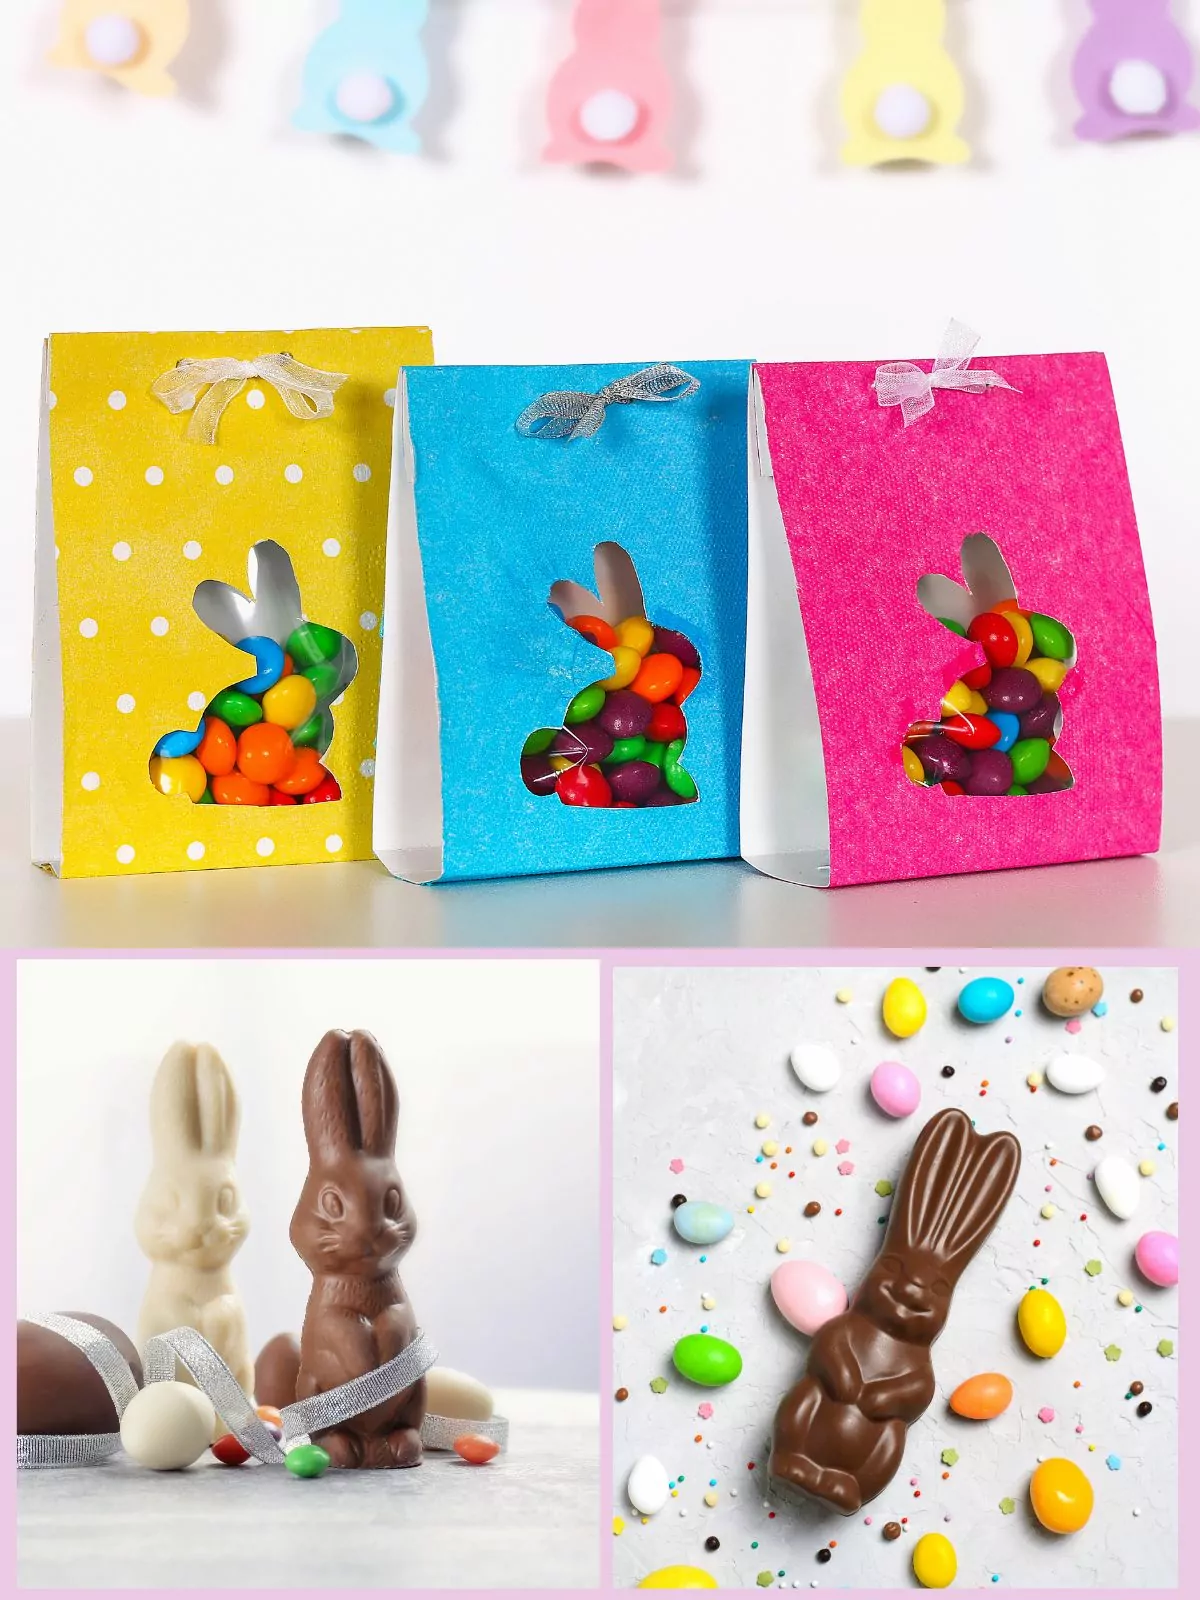 A colorful display of Easter candy classics, including chocolate bunnies, and jelly beans.